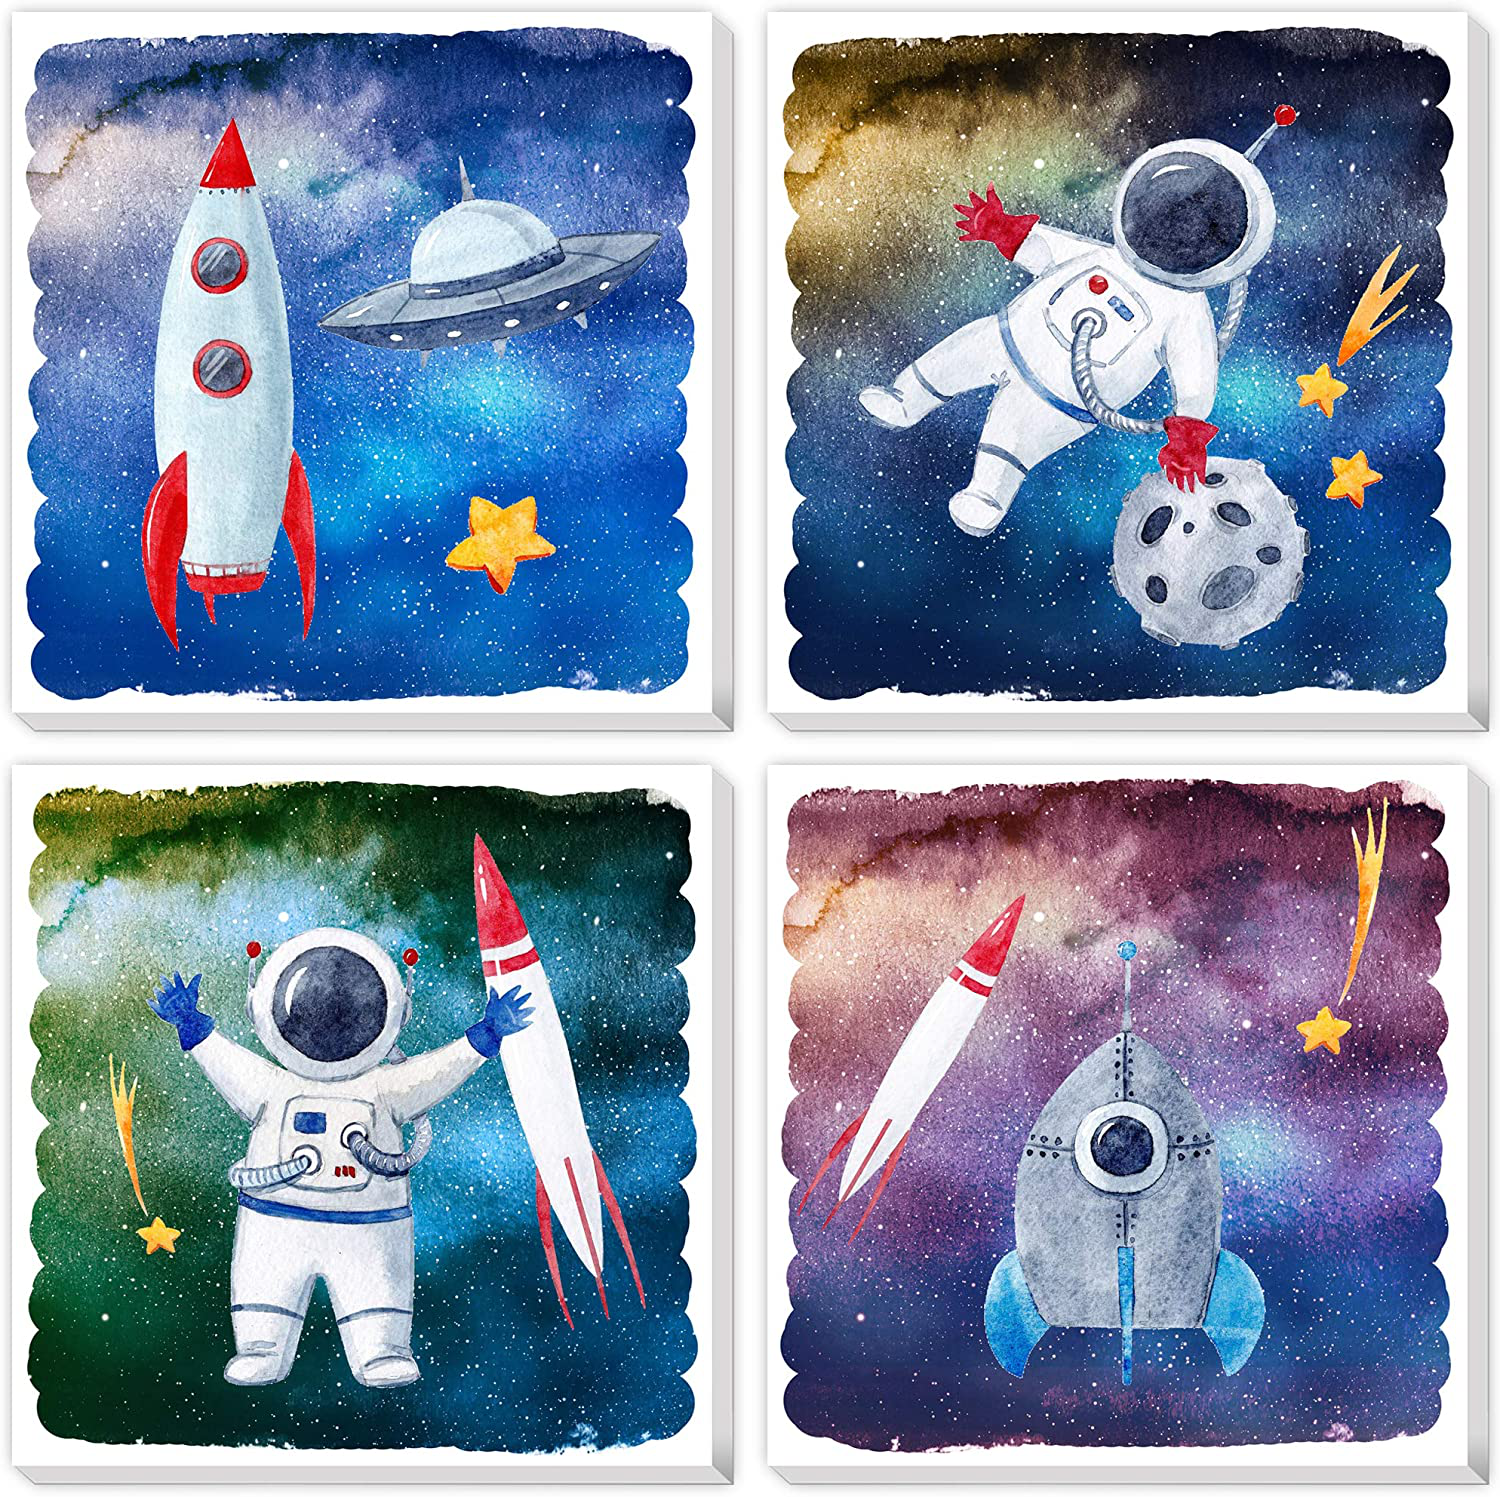 TEXTURE OF DREAMS Cartoon Astronaut Rocket Stars UFO in Outer Space Travel Canvas Wall Art, Boy Room Science Theme Nursery Wall Decor Poster Kid Bedroom Playroom Dorm Classroom 4 Pack (10" x 10")